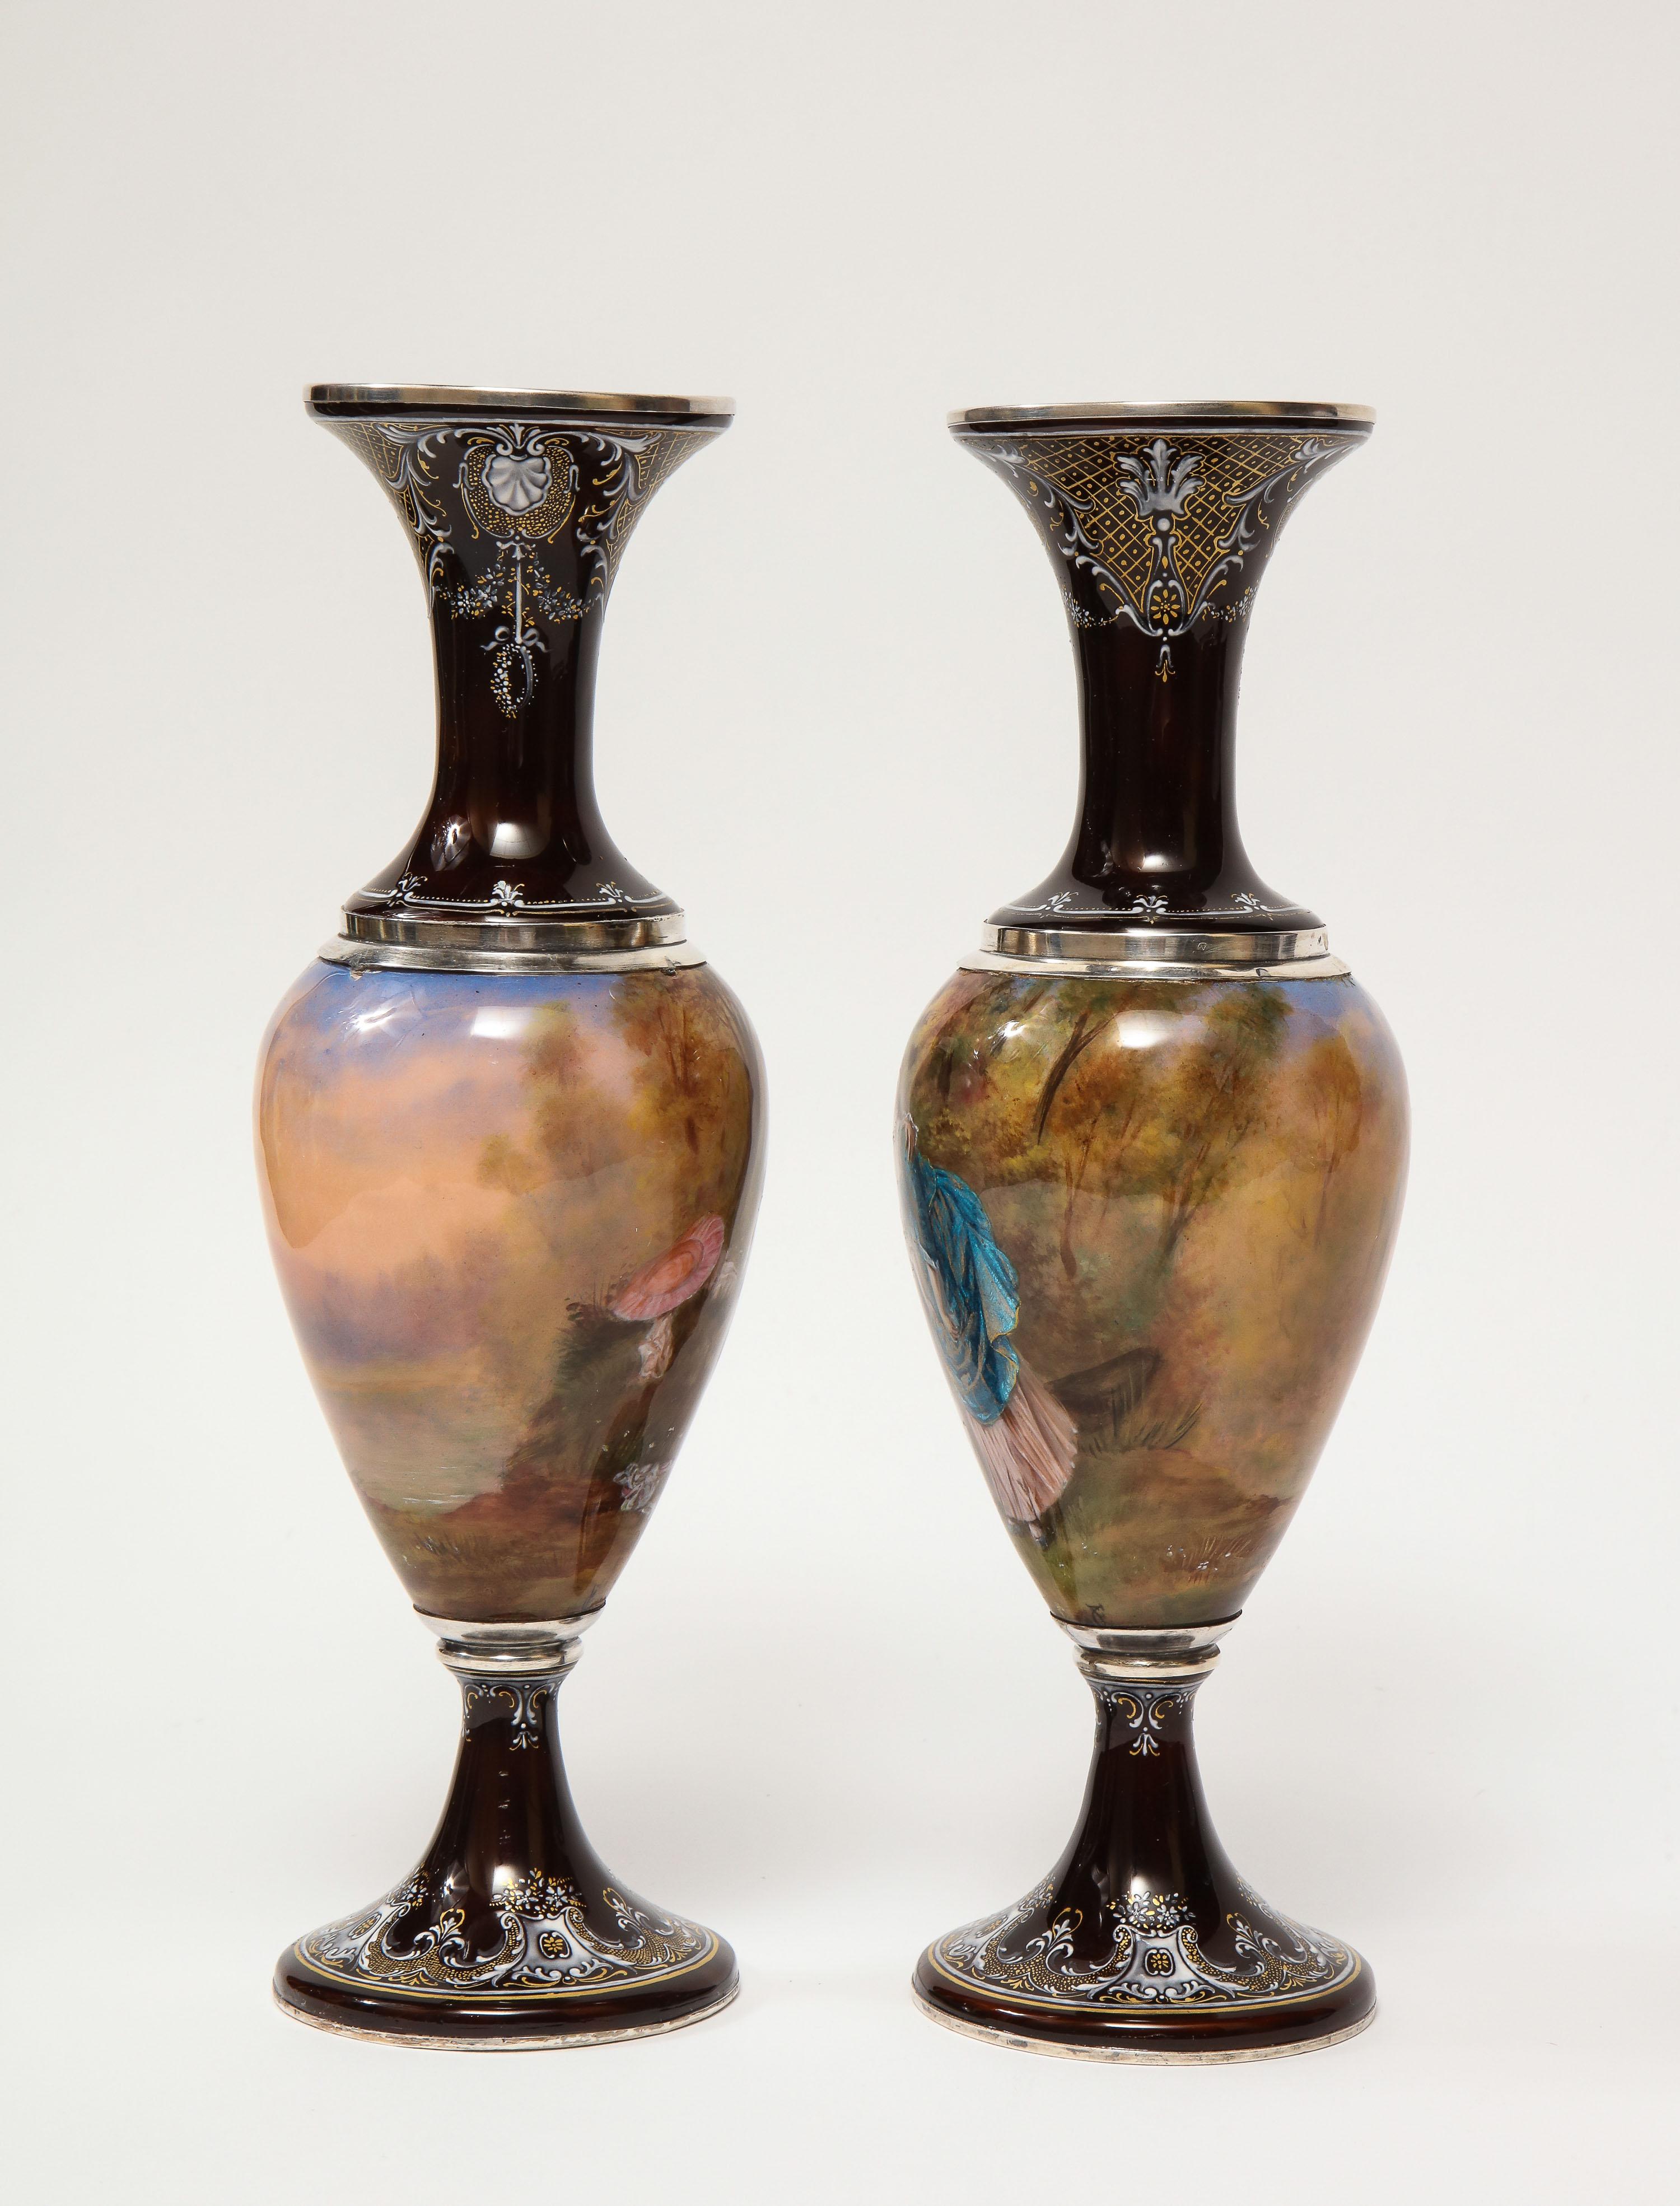 Pair of French Silver & Limoges Enamel Vases, Retailed by Tiffany & Co. 1